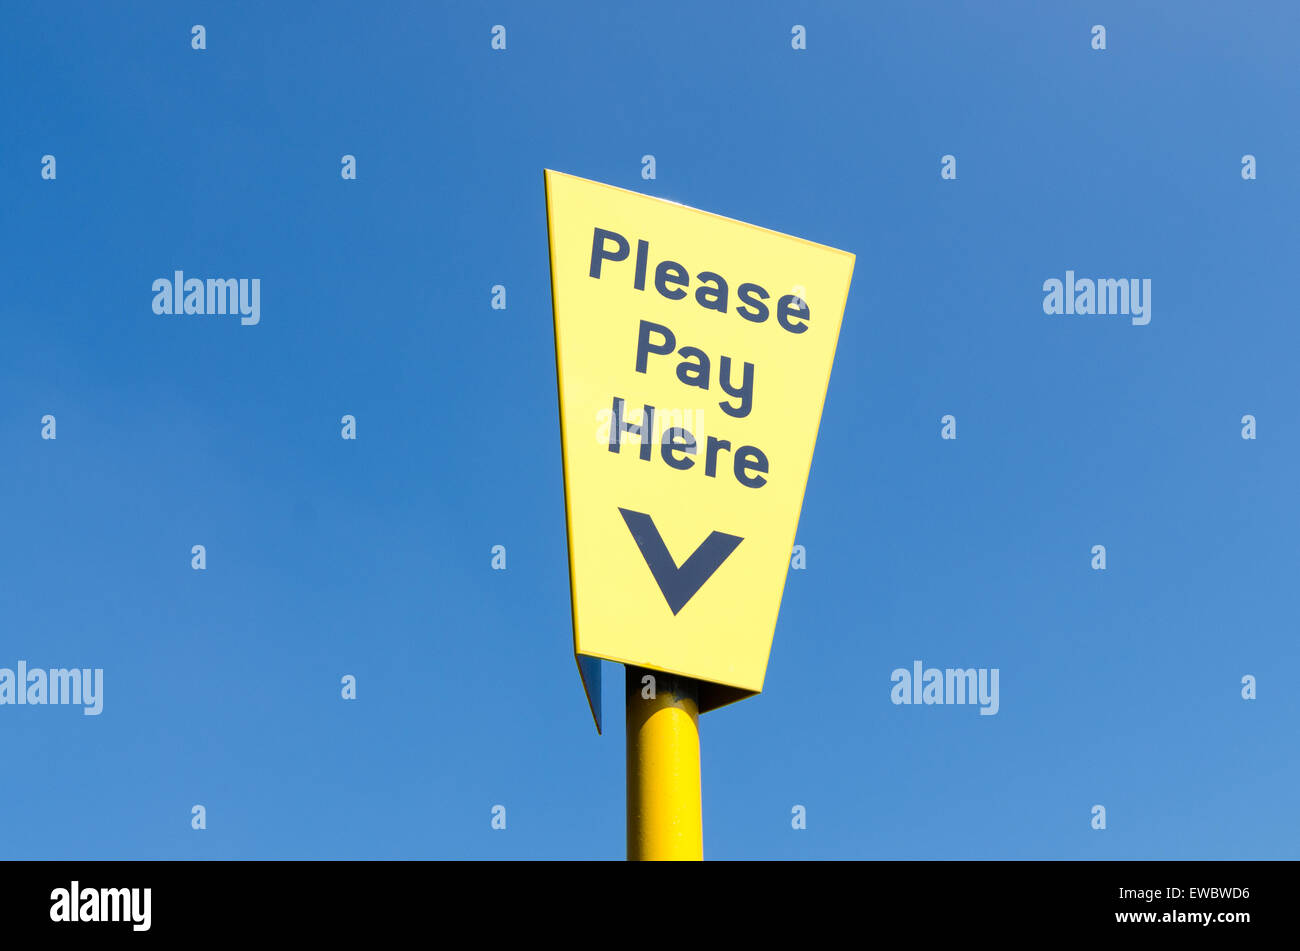 Please Pay Here blue and yellow car park sign against blue sky Stock Photo